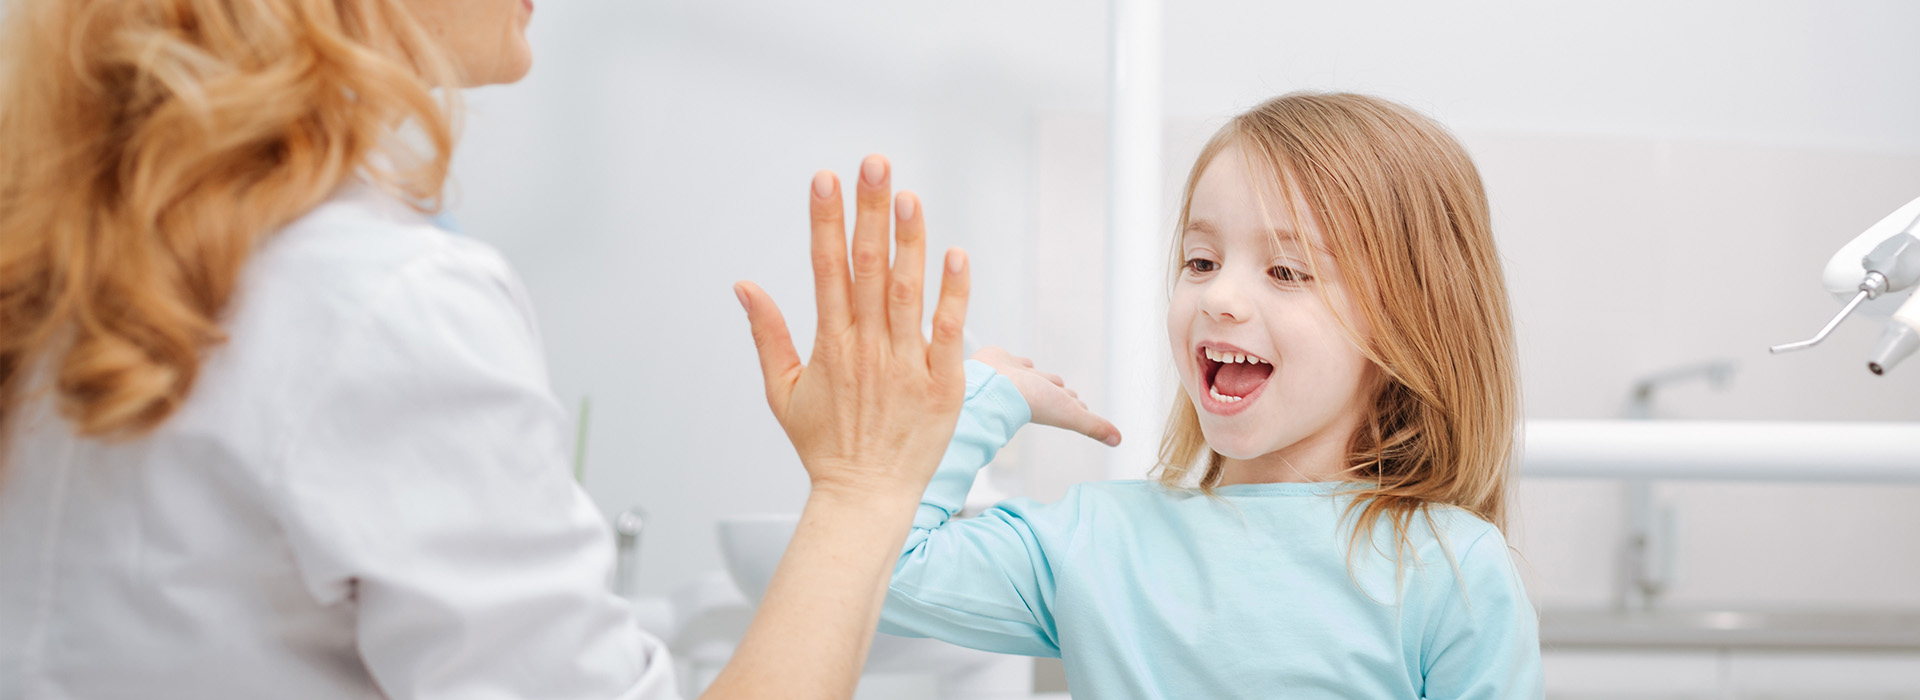 The image shows a woman and a young girl in a bathroom setting, with the woman appearing to interact with the child.